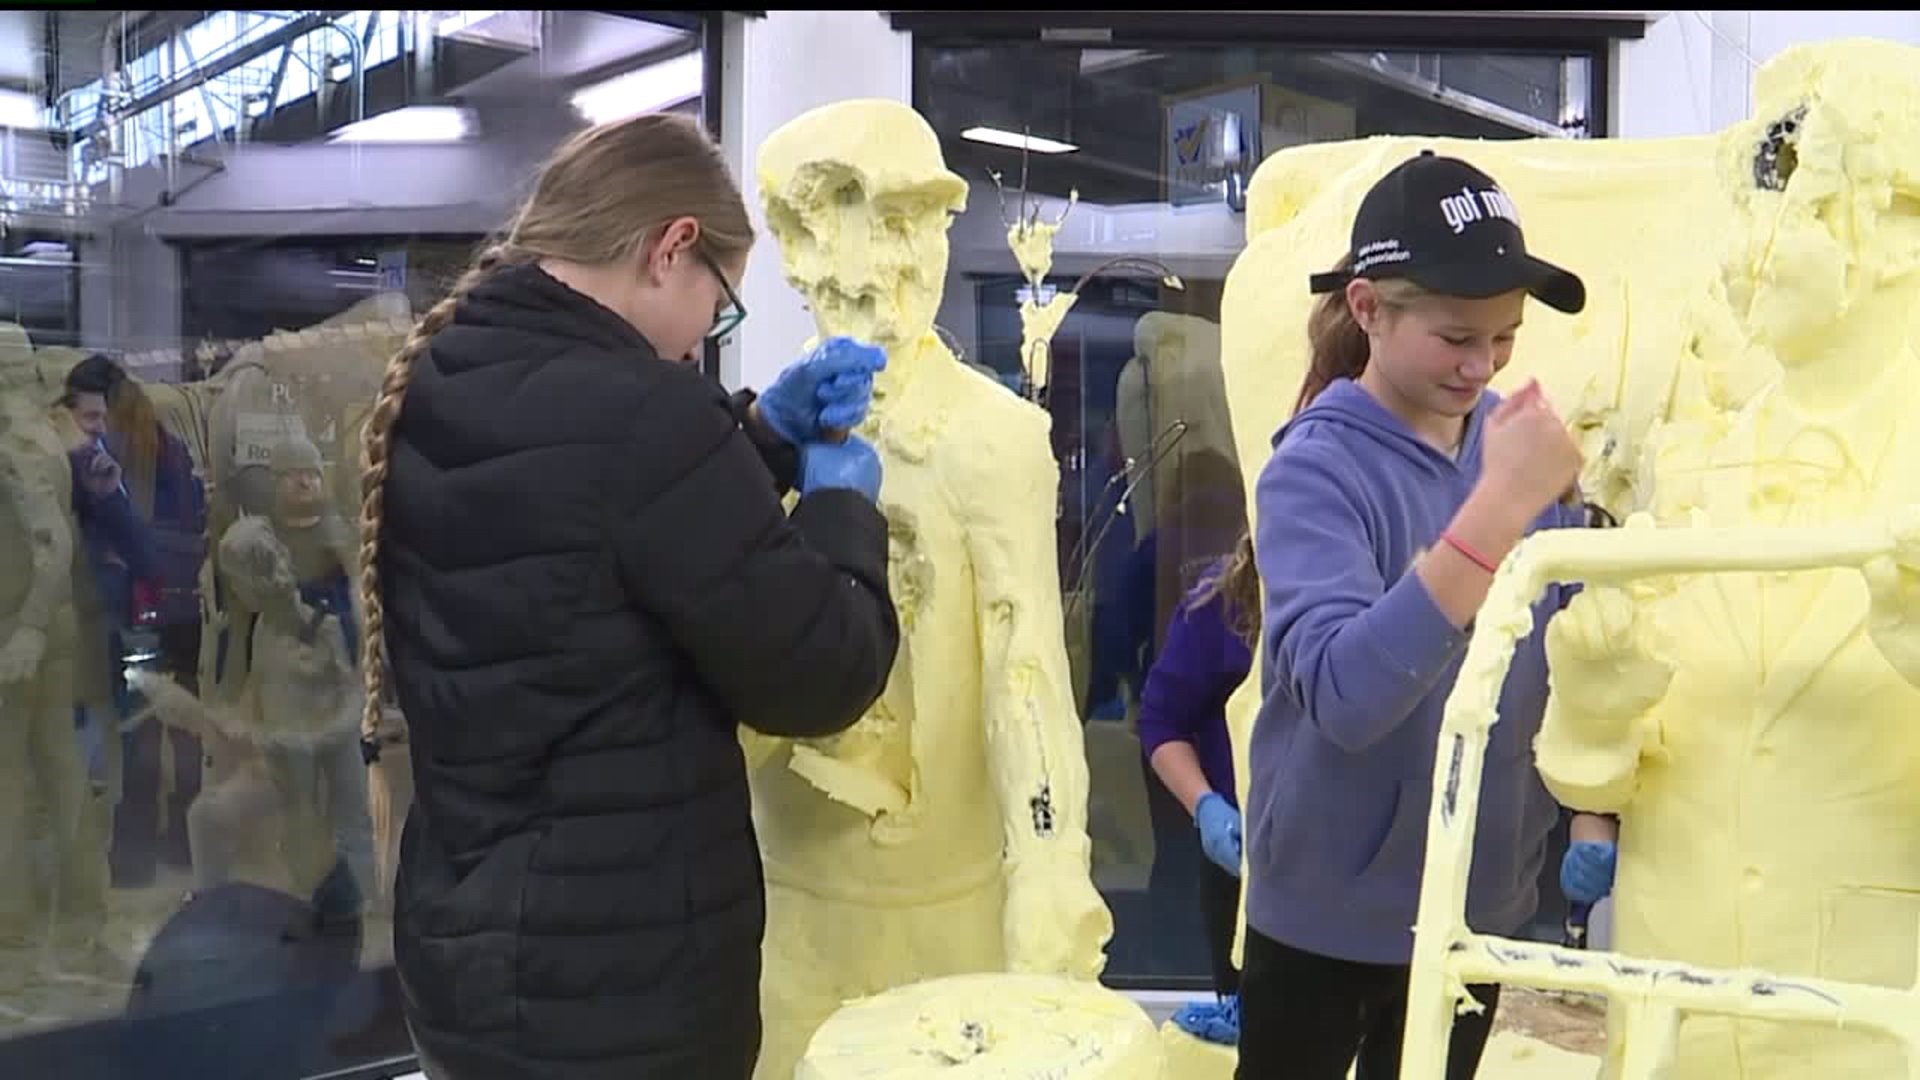 Farm Show butter sculpture will be used to power Juniata Co. dairy farm